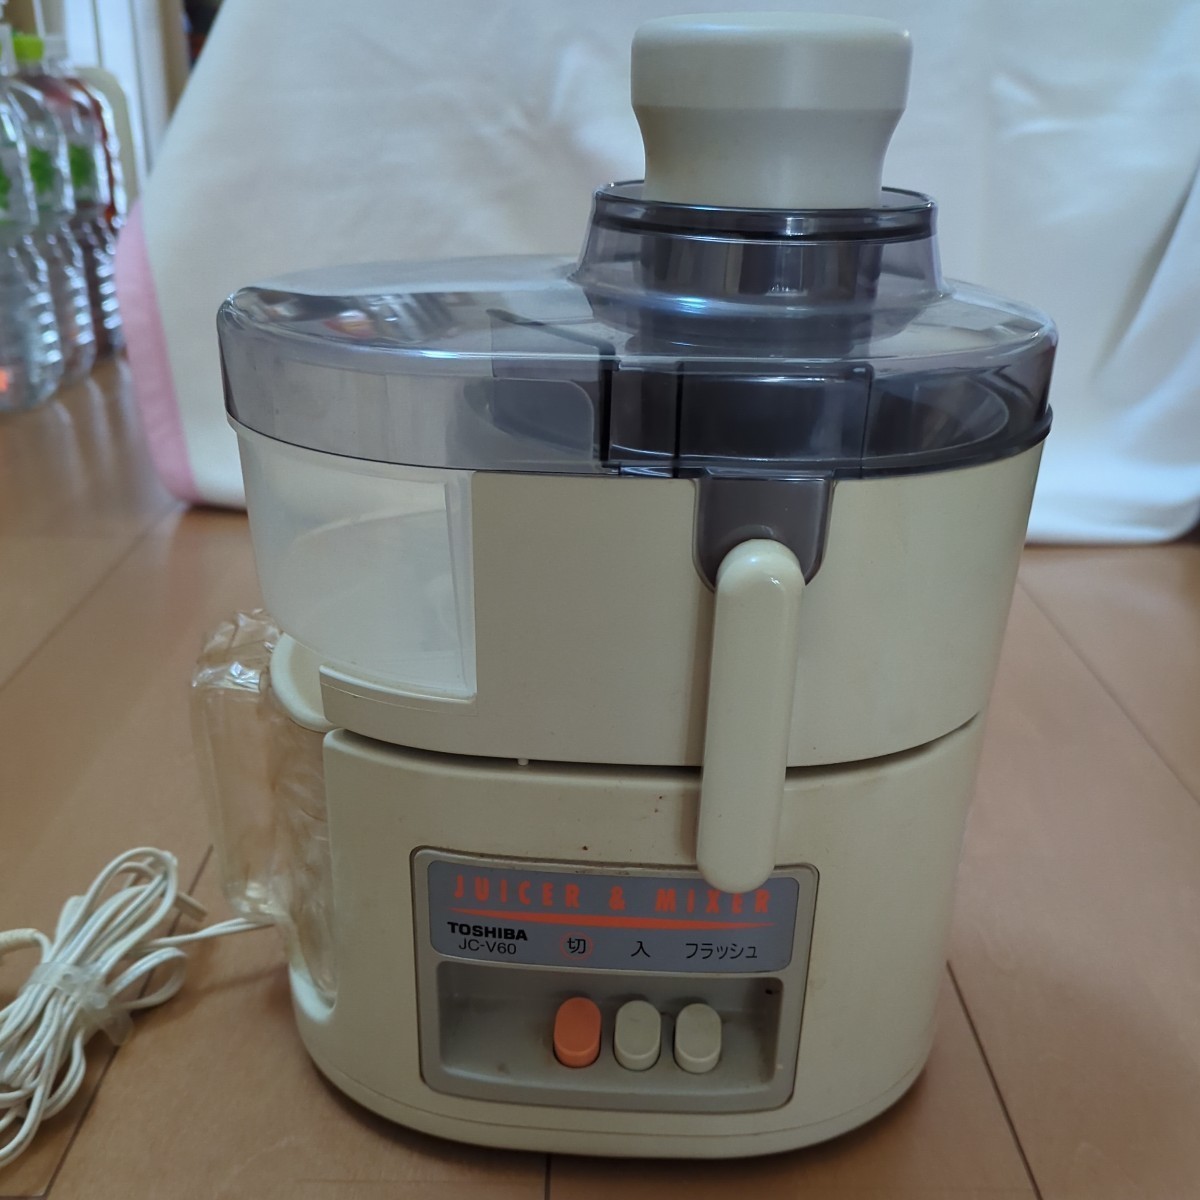  Toshiba juicer mixer home use mixer only use item operation verification ending secondhand goods 